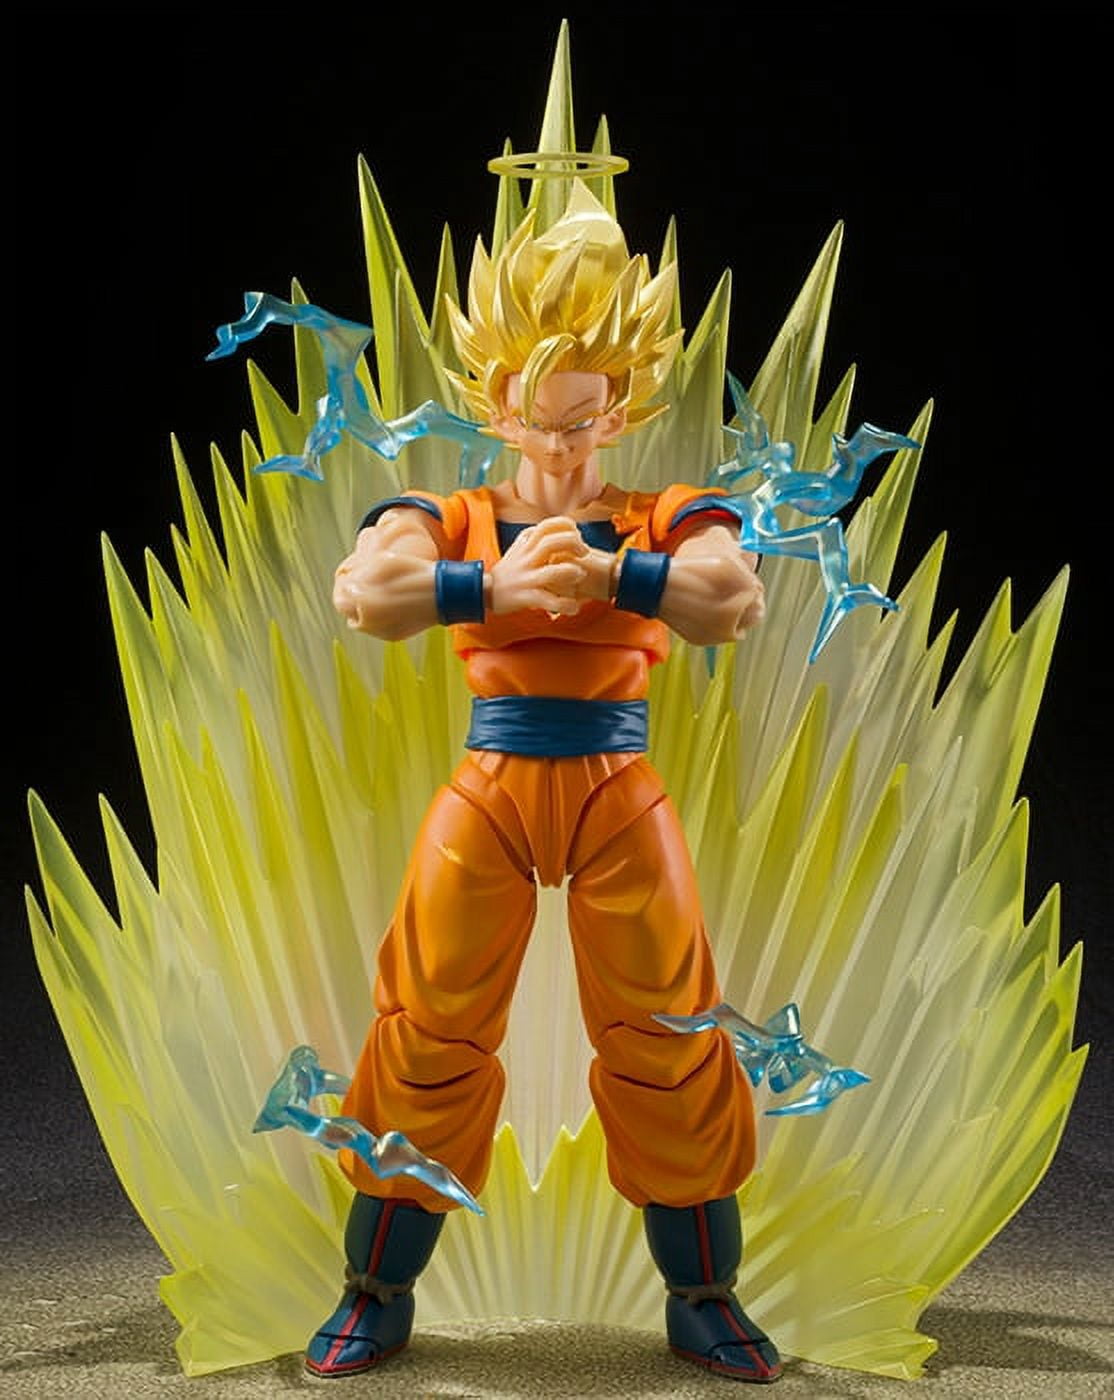 Dragon Ball Exclusives added a - Dragon Ball Exclusives